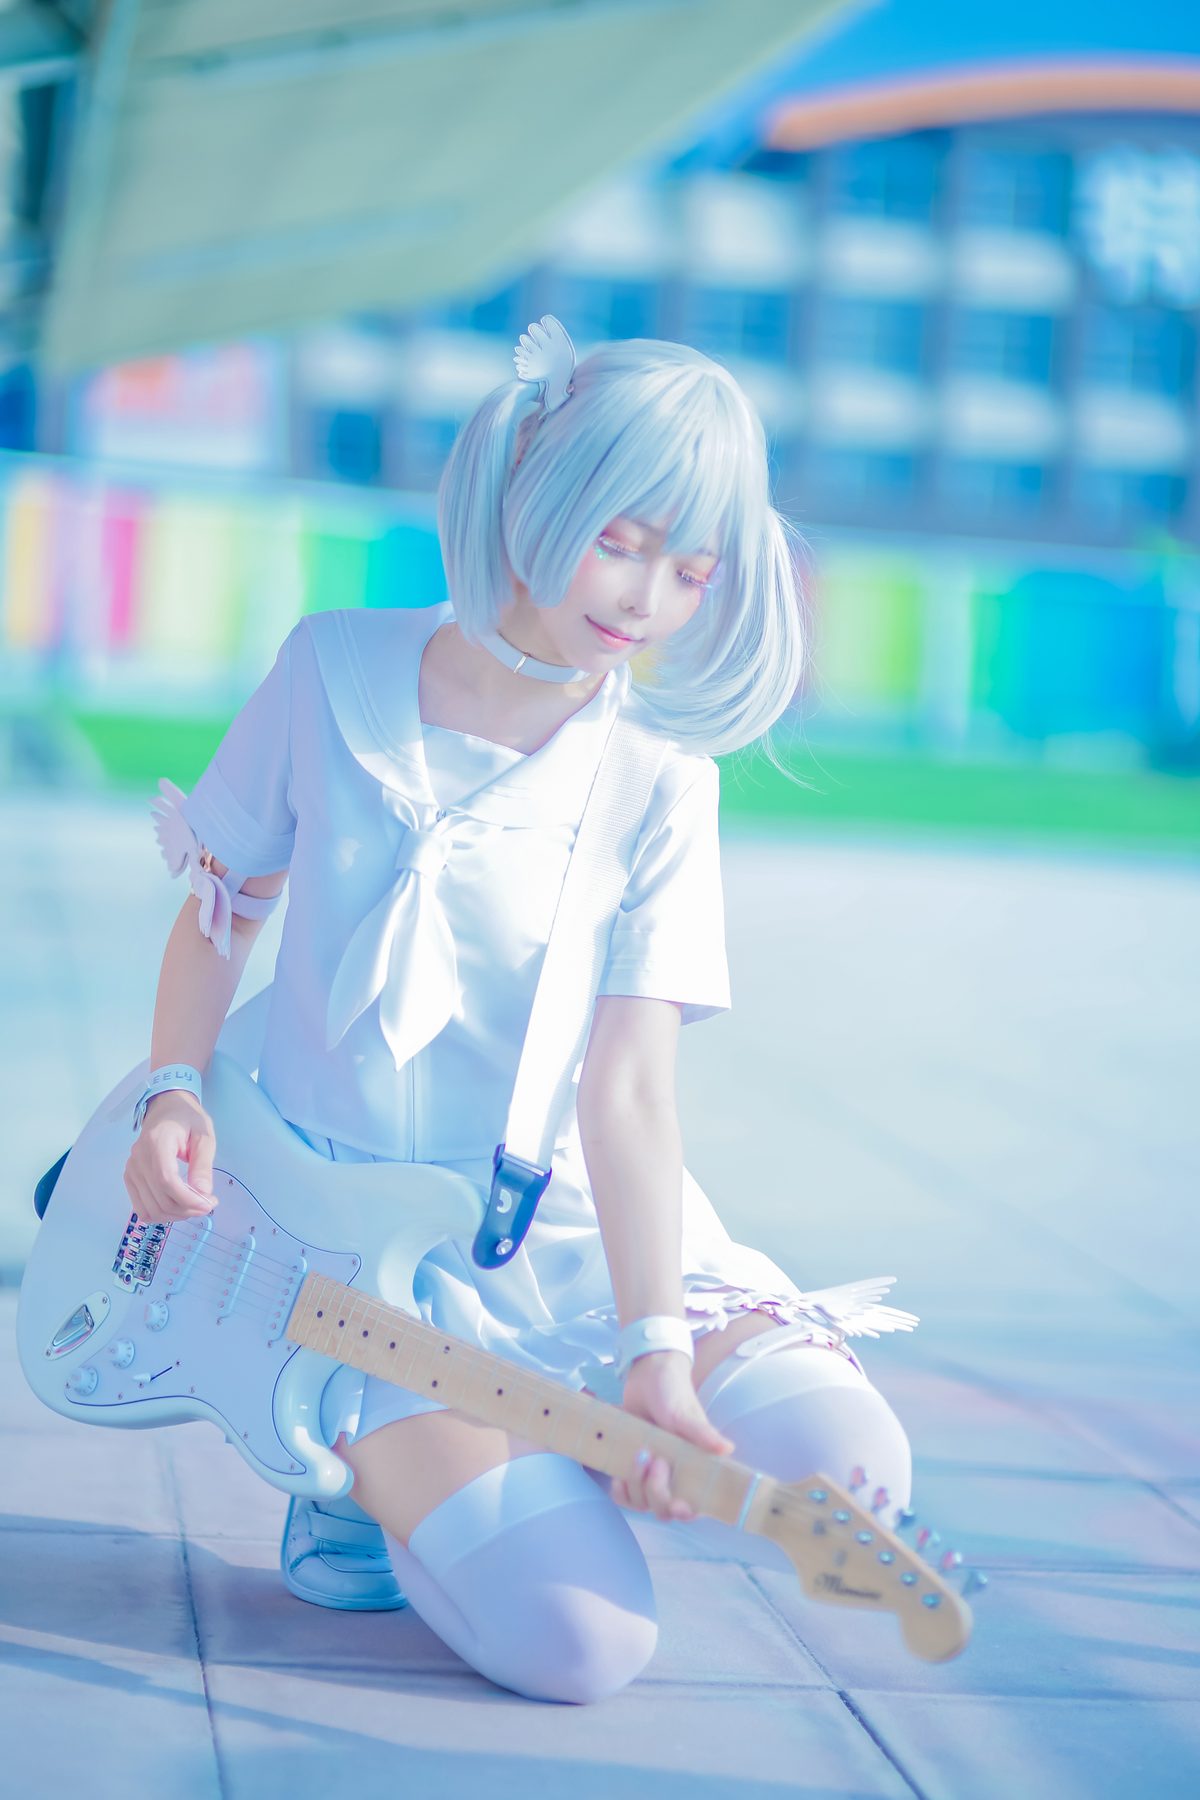 Coser@Ely_eee ElyEE子 TUESDAY TWINTAIL A 0015 2180672846.jpg